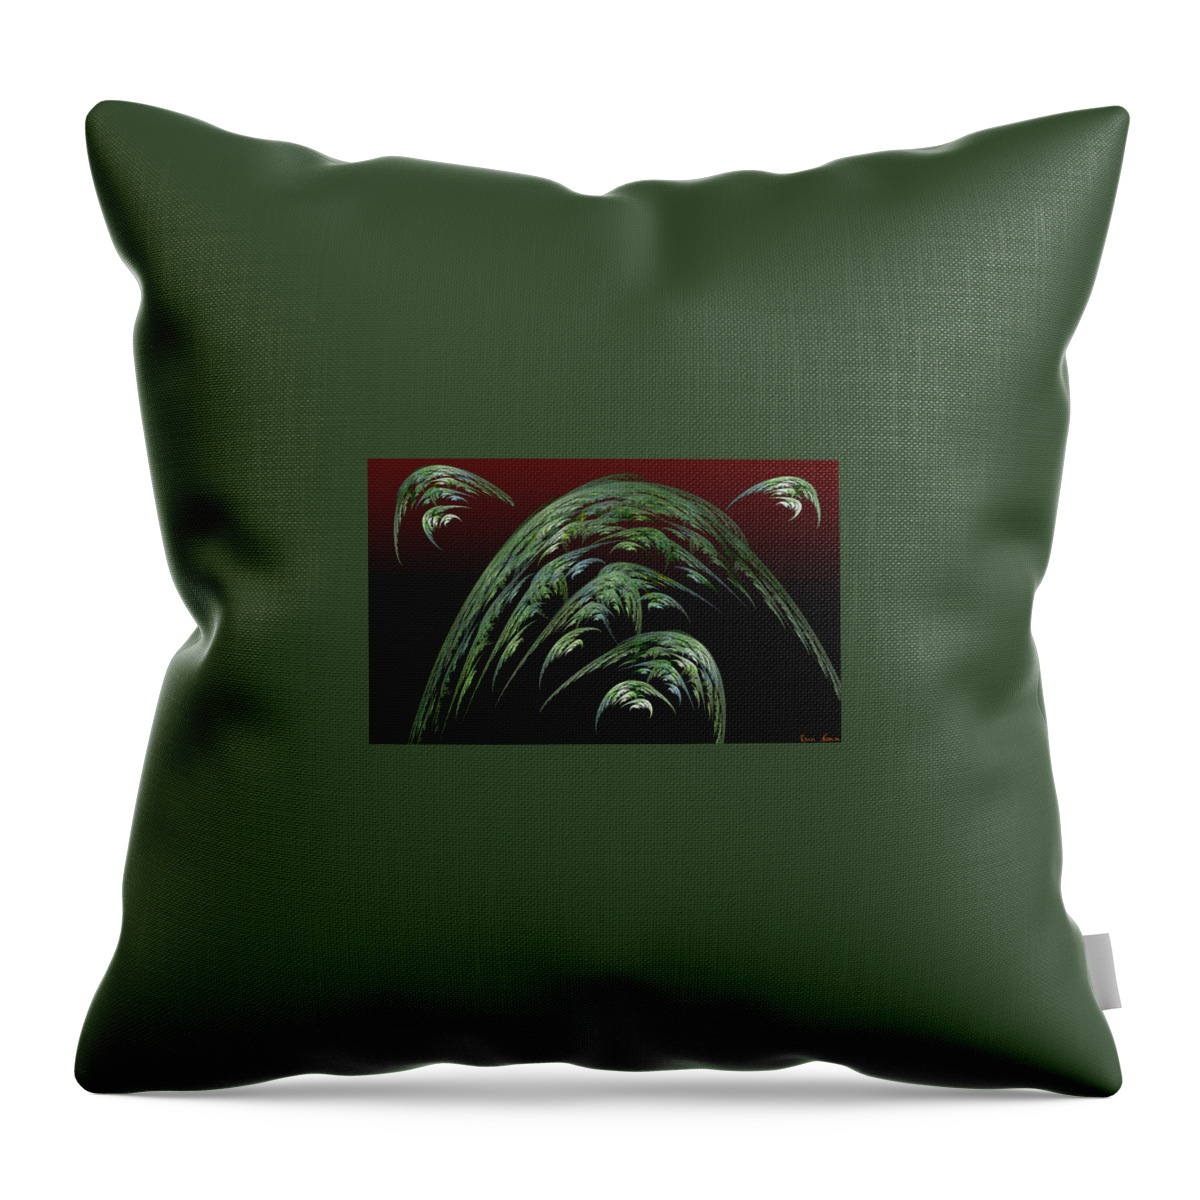  Throw Pillow featuring the digital art Dread Full by Rein Nomm